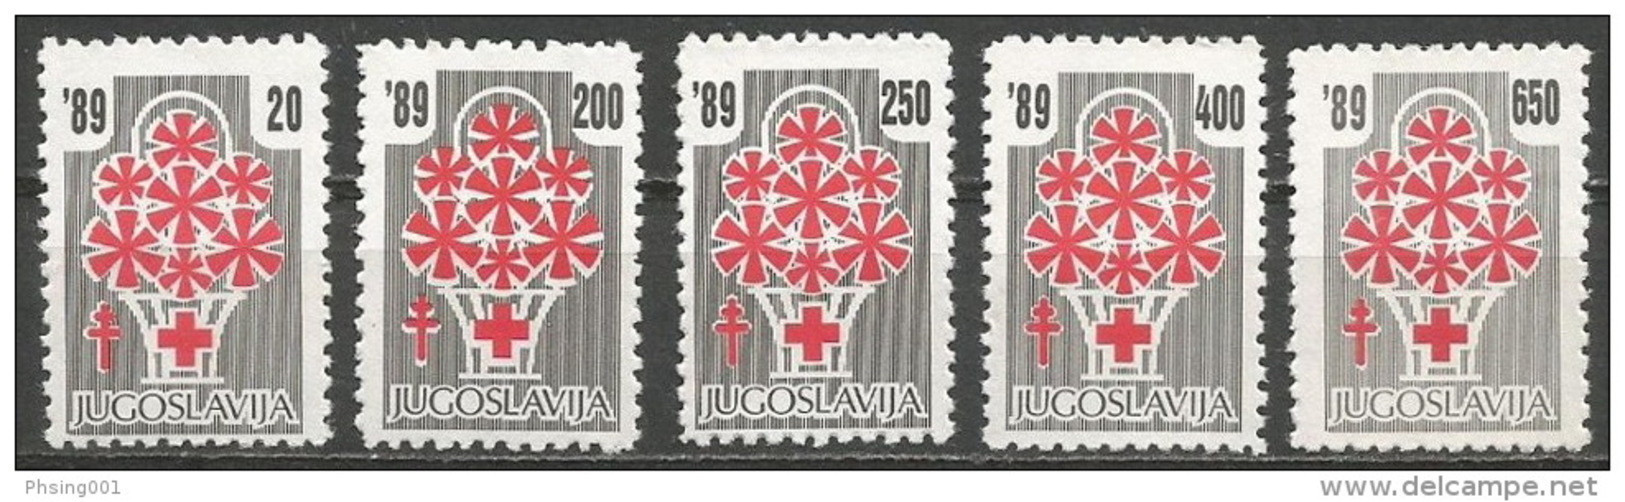 Yugoslavia 1989 Red Cross Tuberculosis TBC Postage Due Tax Charity Surcharge, Set MNH - Impuestos